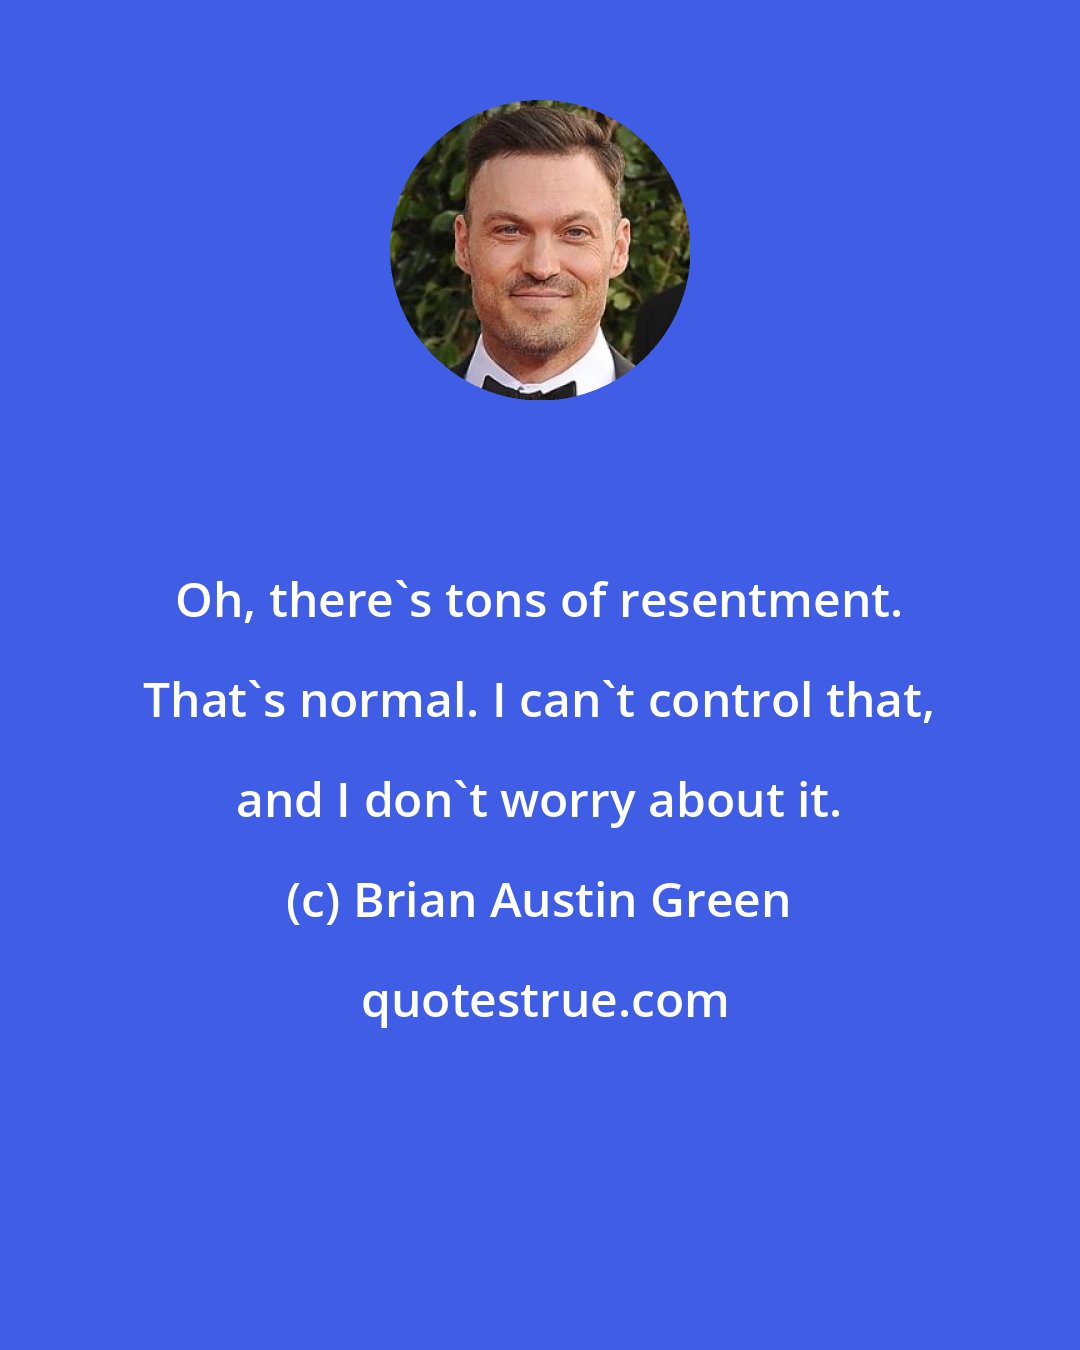 Brian Austin Green: Oh, there's tons of resentment. That's normal. I can't control that, and I don't worry about it.